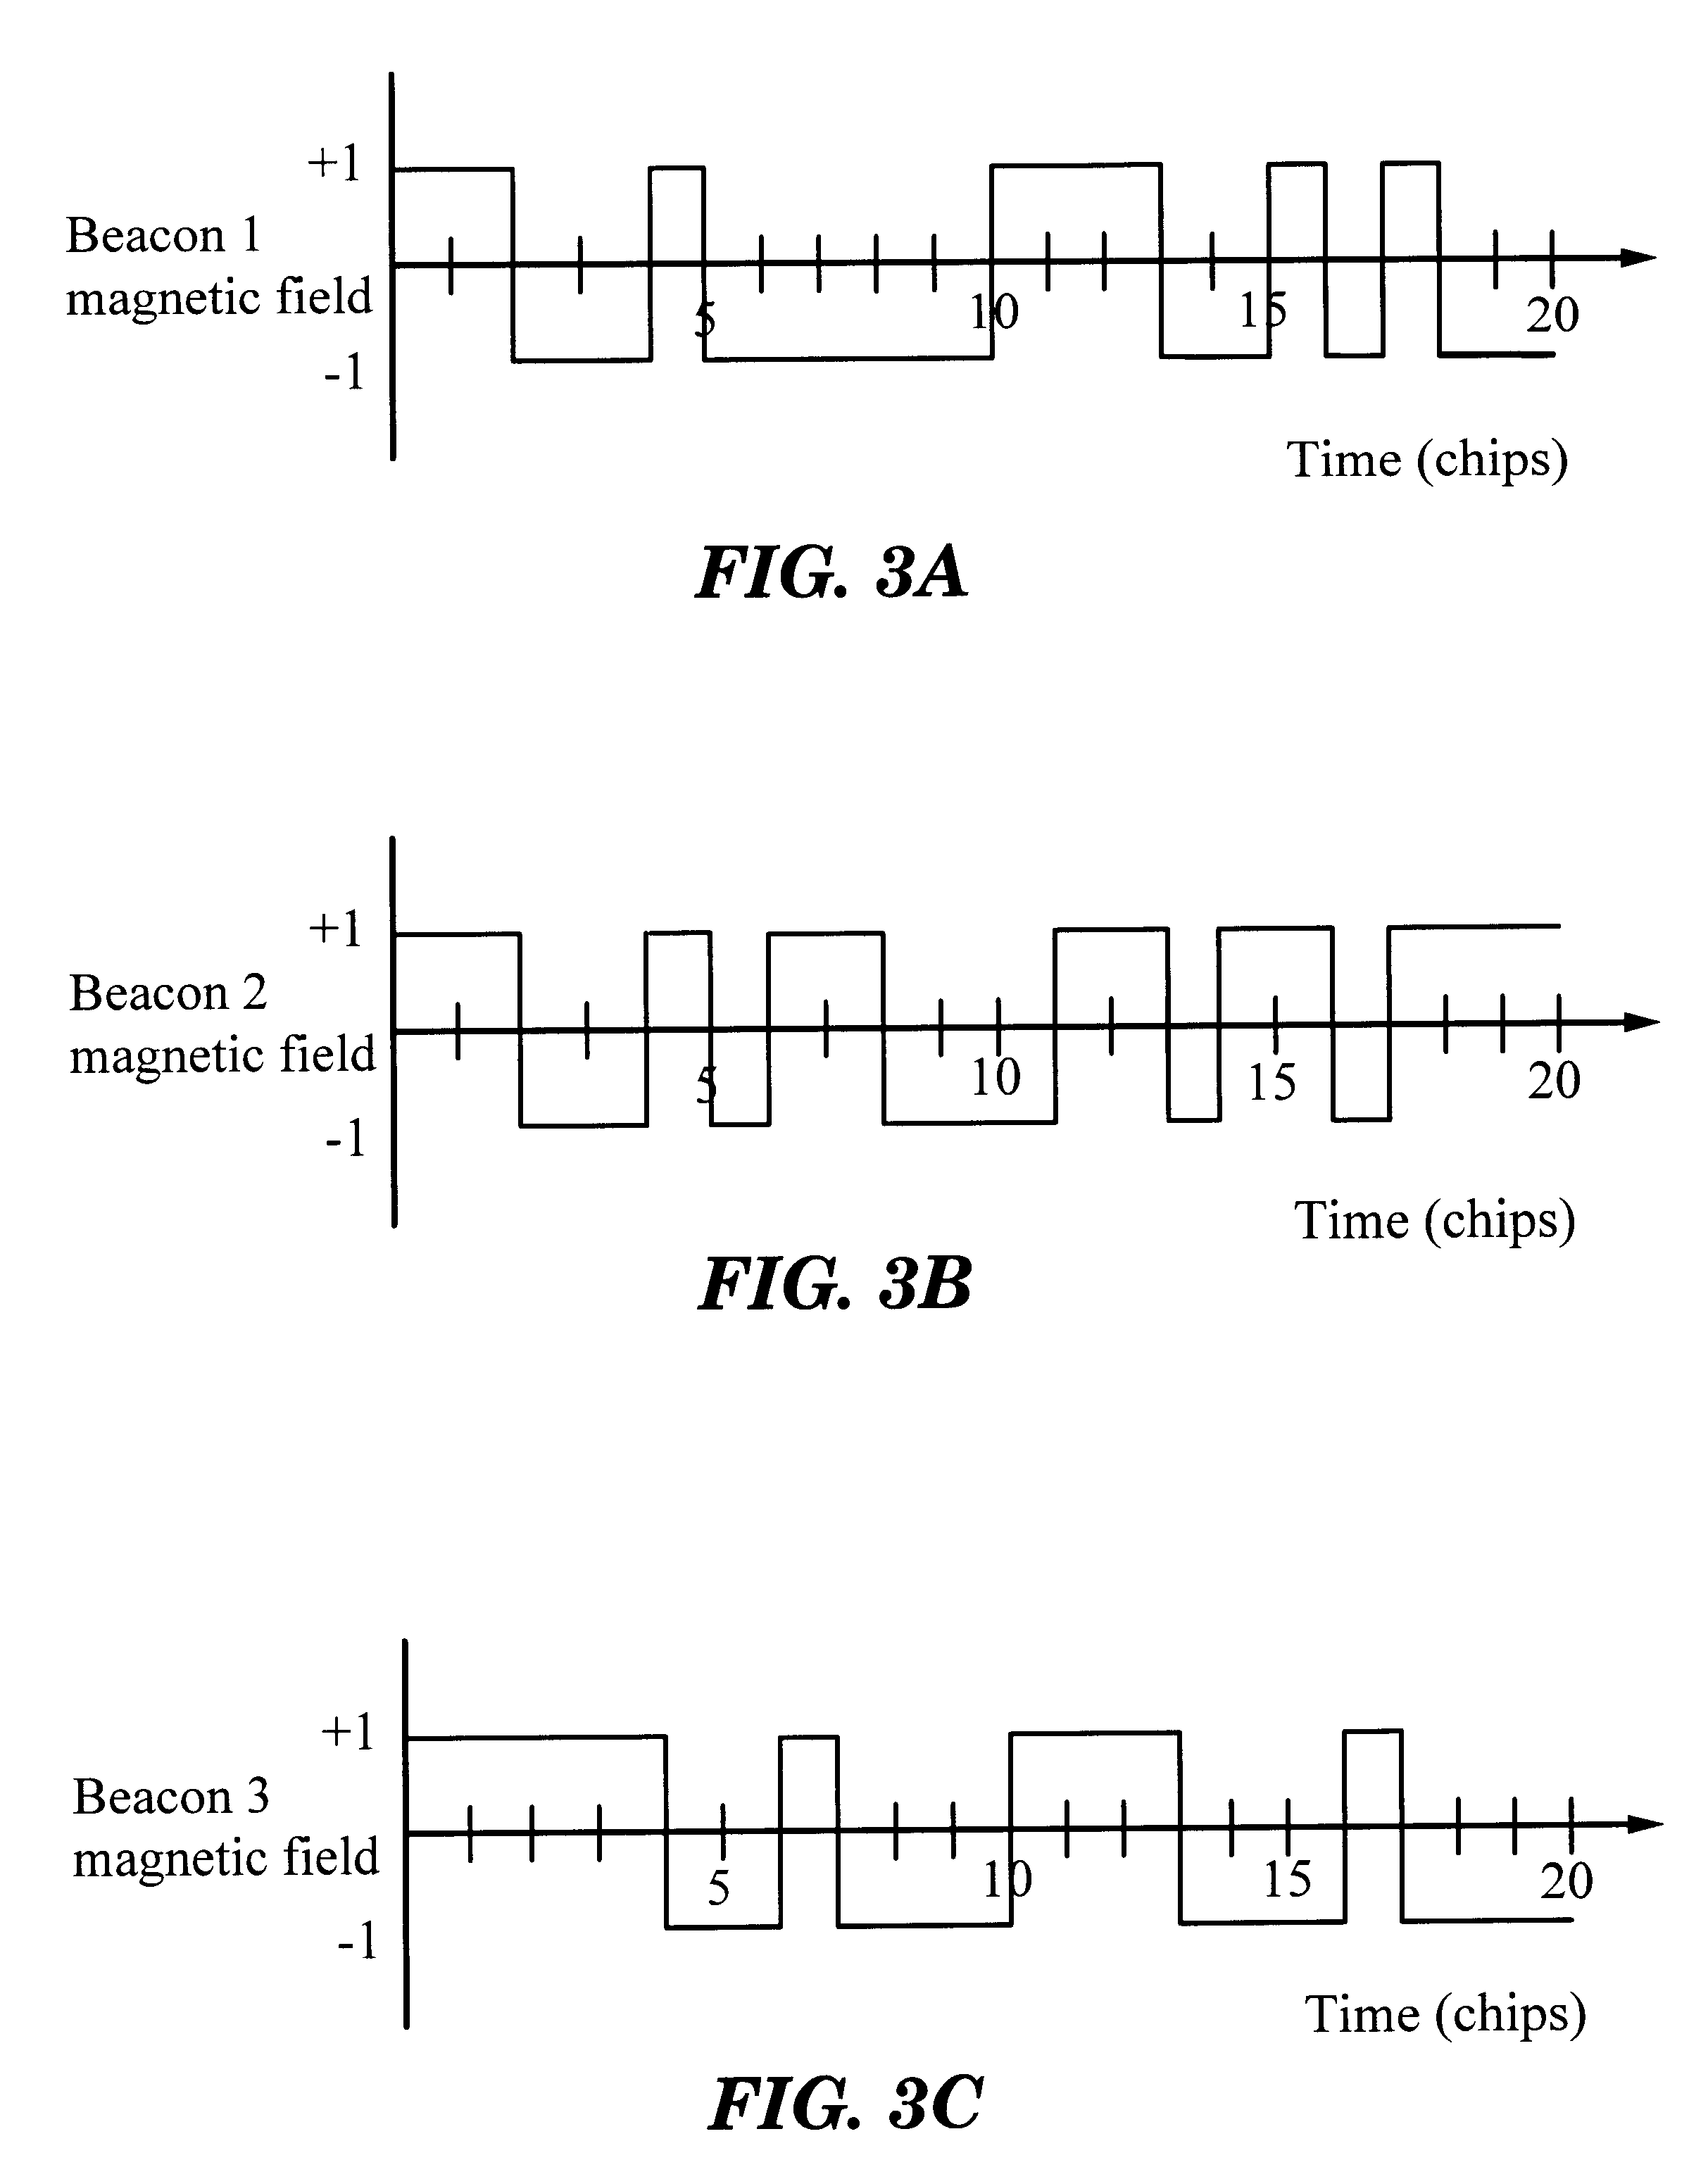 Distributed magnetic field positioning system using code division multiple access